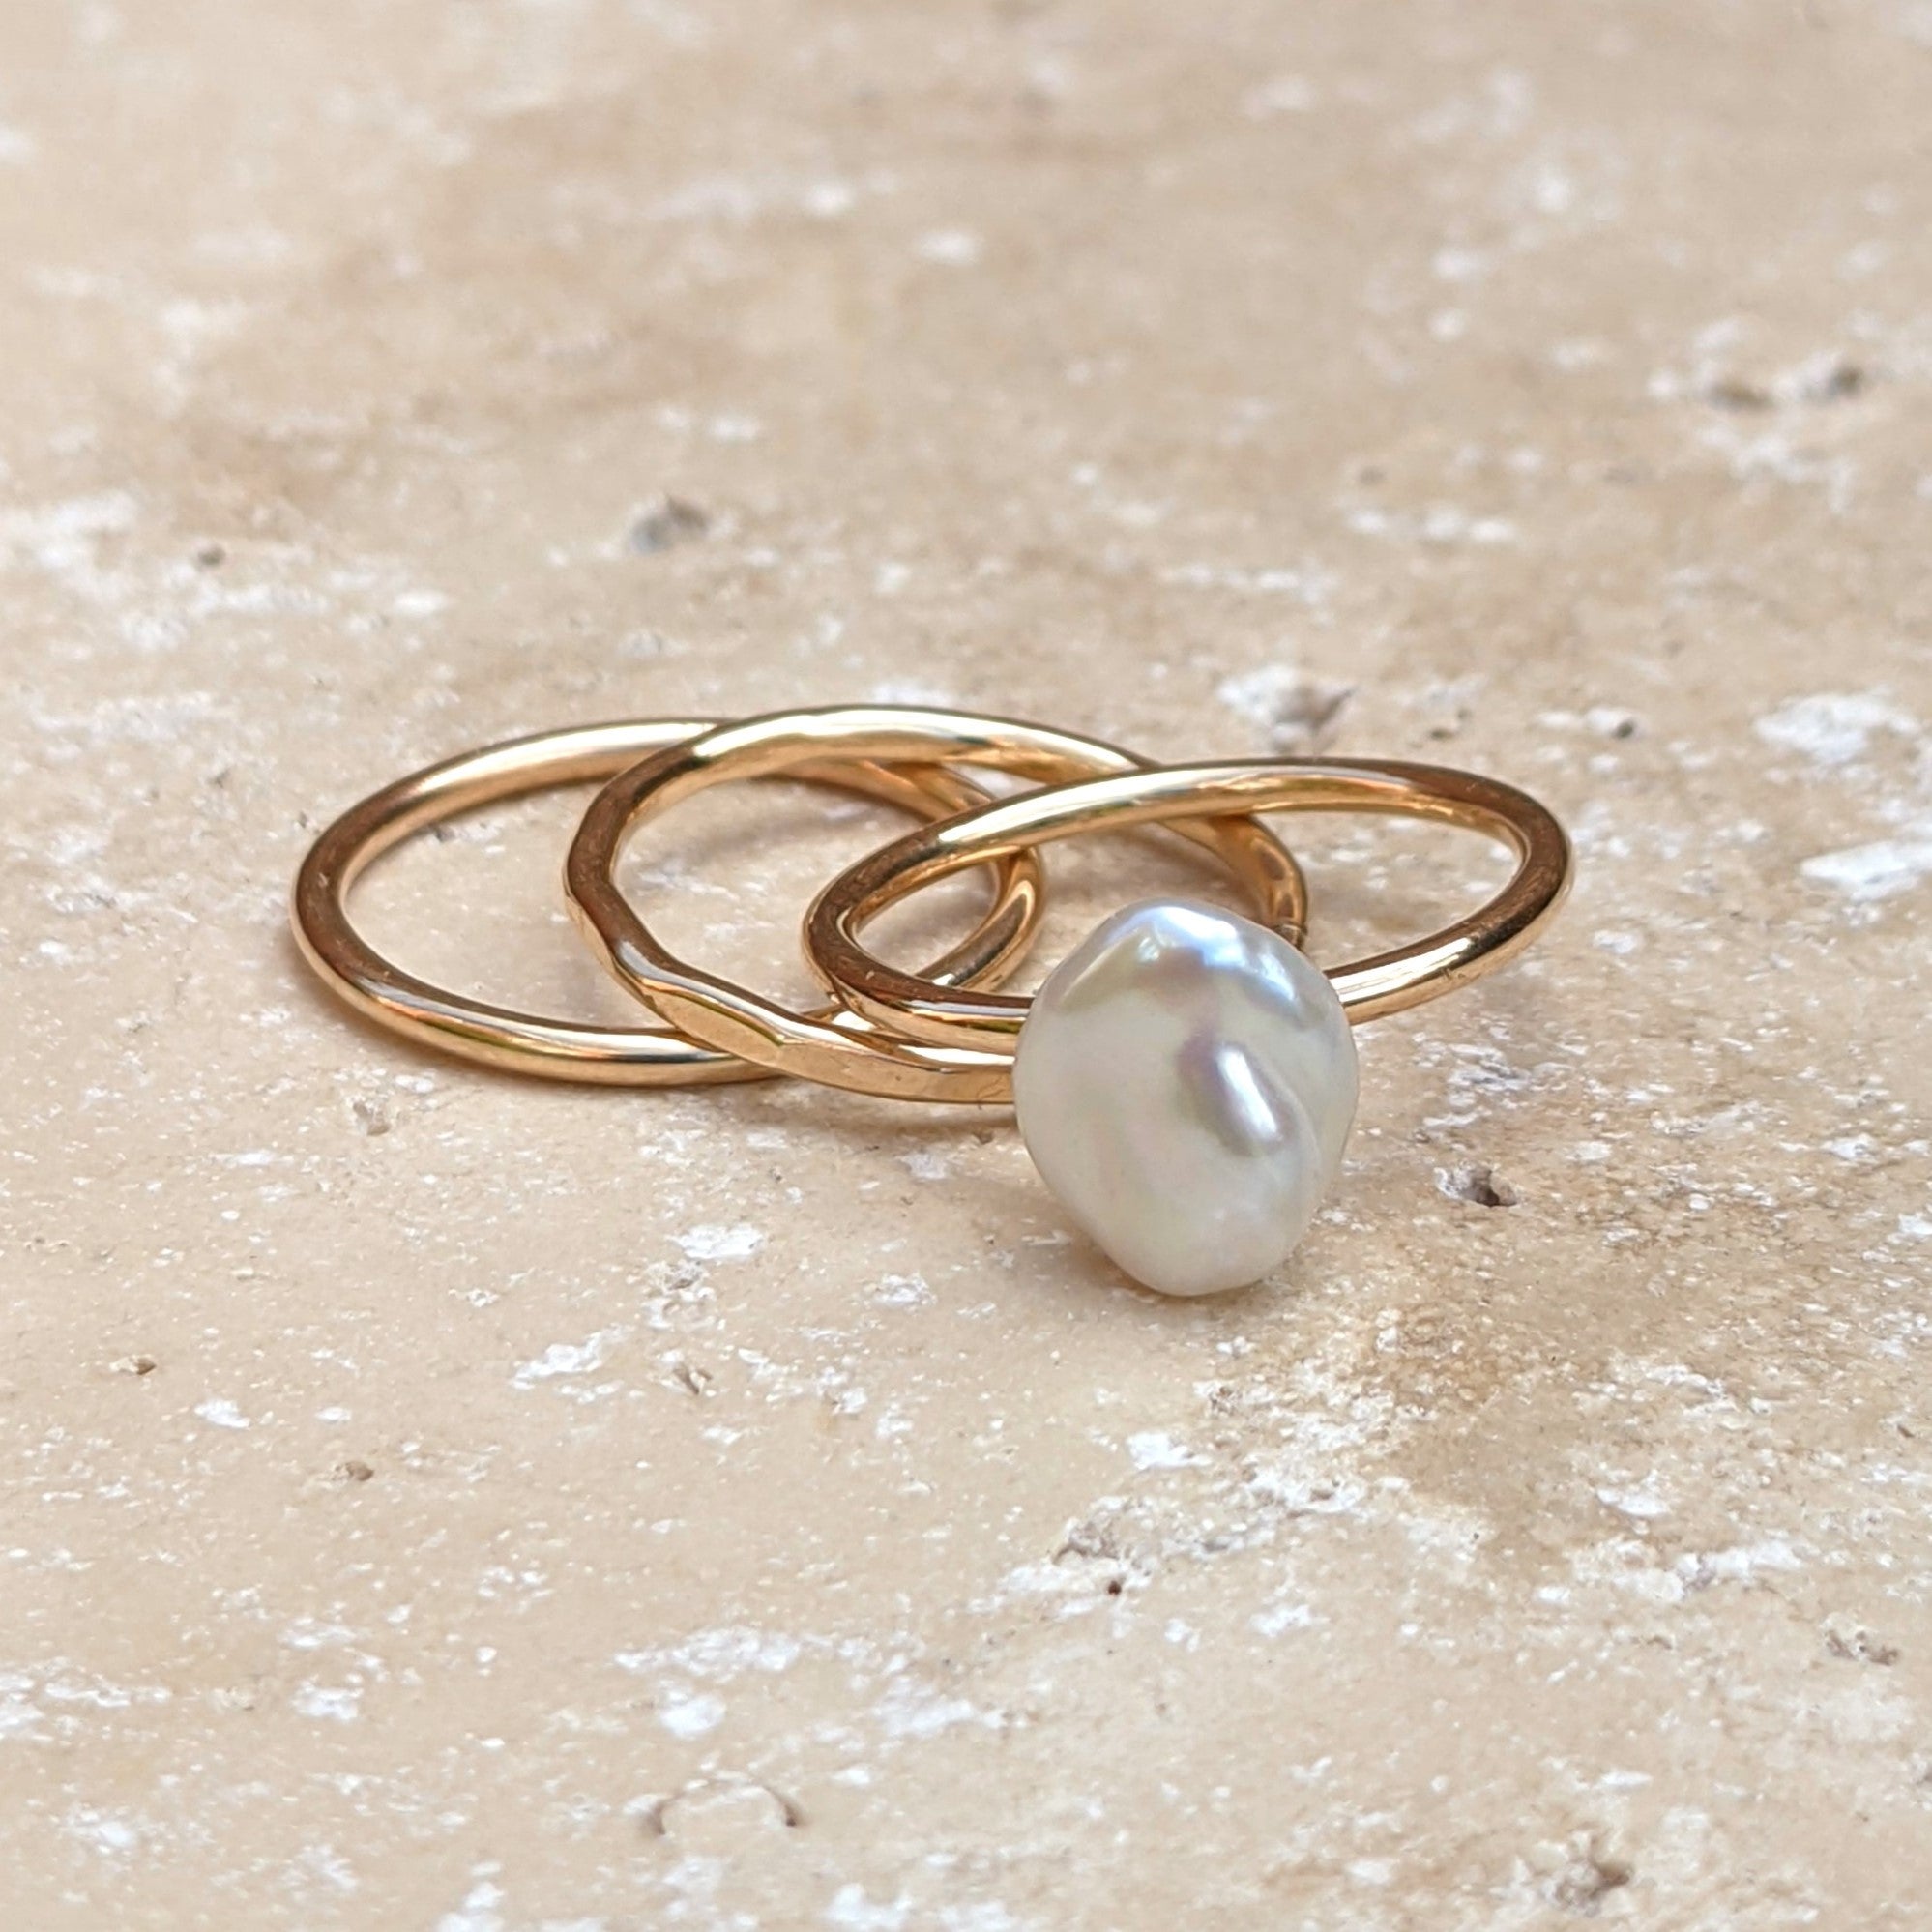 A trio of gold filled stacking rings - plain, hammered and pearl